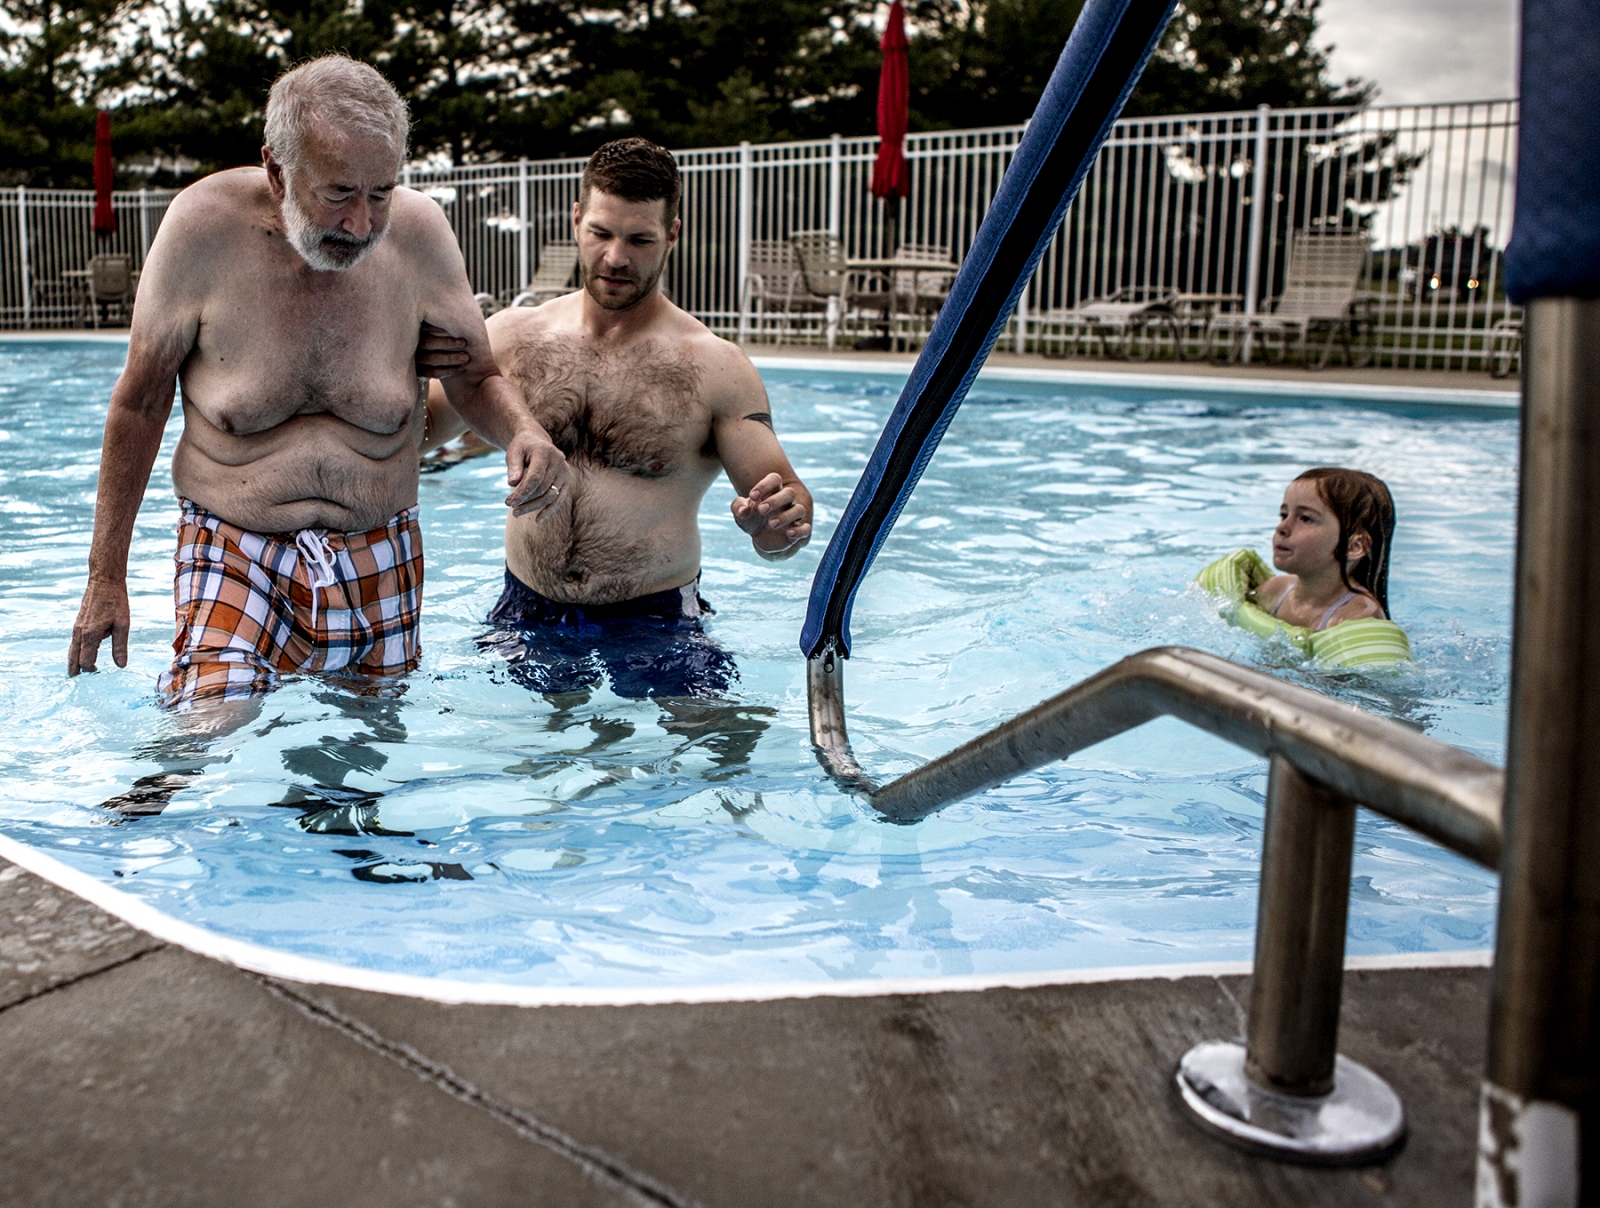 Sandwiched In - Morgan helps his dad wade through the pool while his...